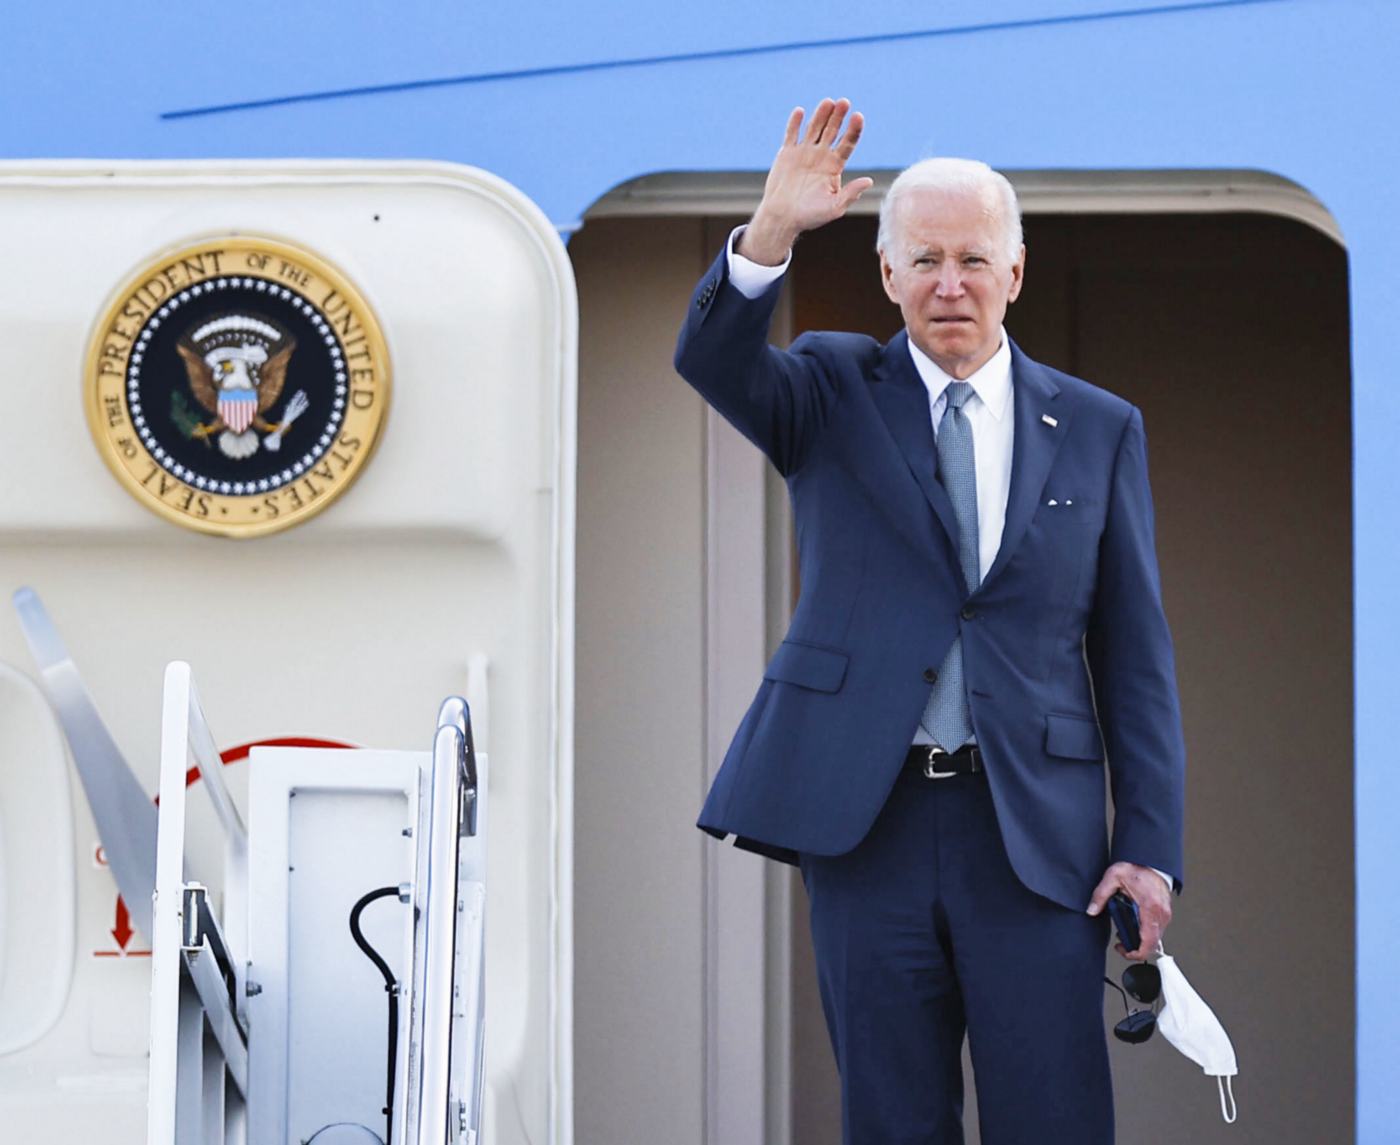 Chinese netizens accuse Biden of using gaffes as a “strategic advantage”